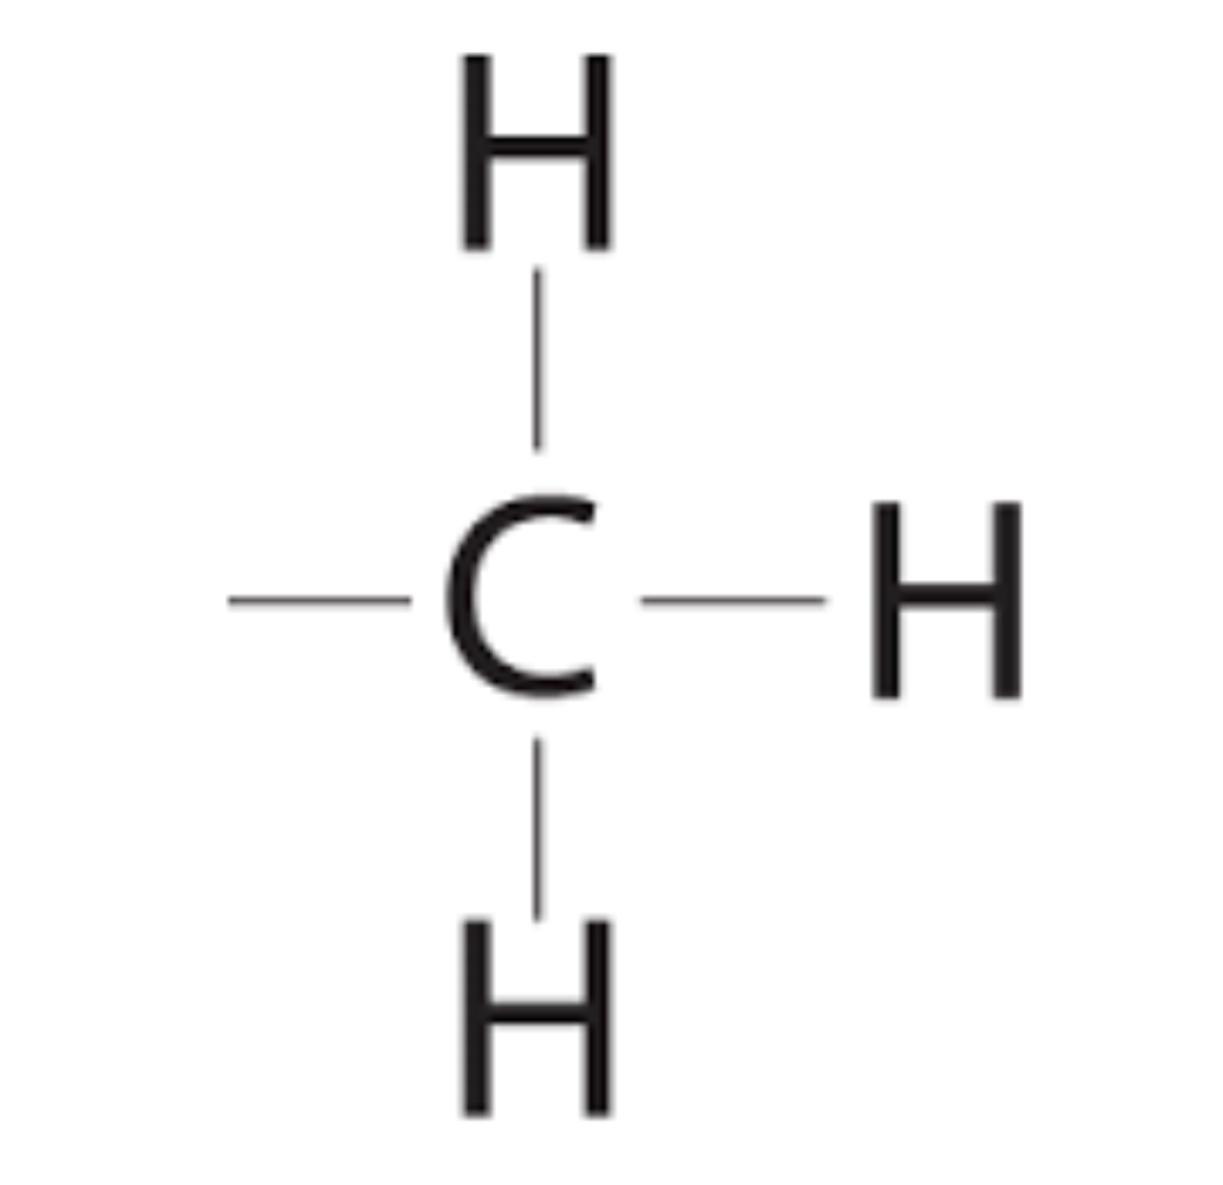 <p>-CH3 (forms methylated compounds) (does not react but acts as a tag on molecules)</p>